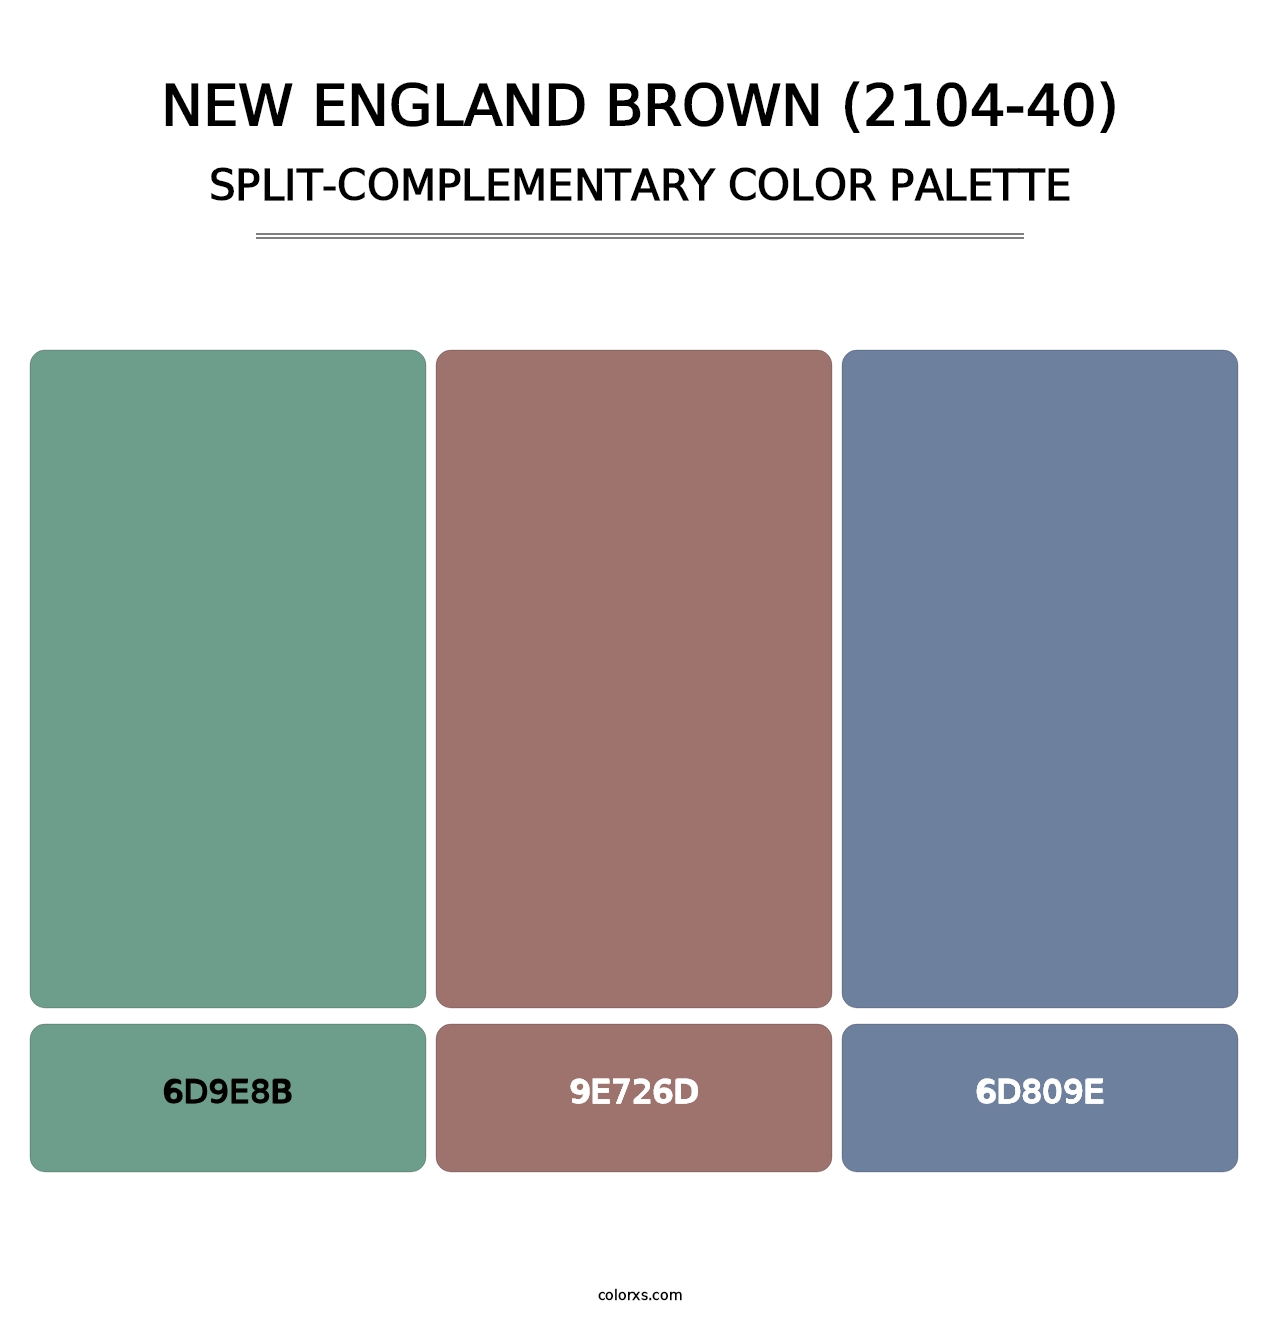 New England Brown (2104-40) - Split-Complementary Color Palette